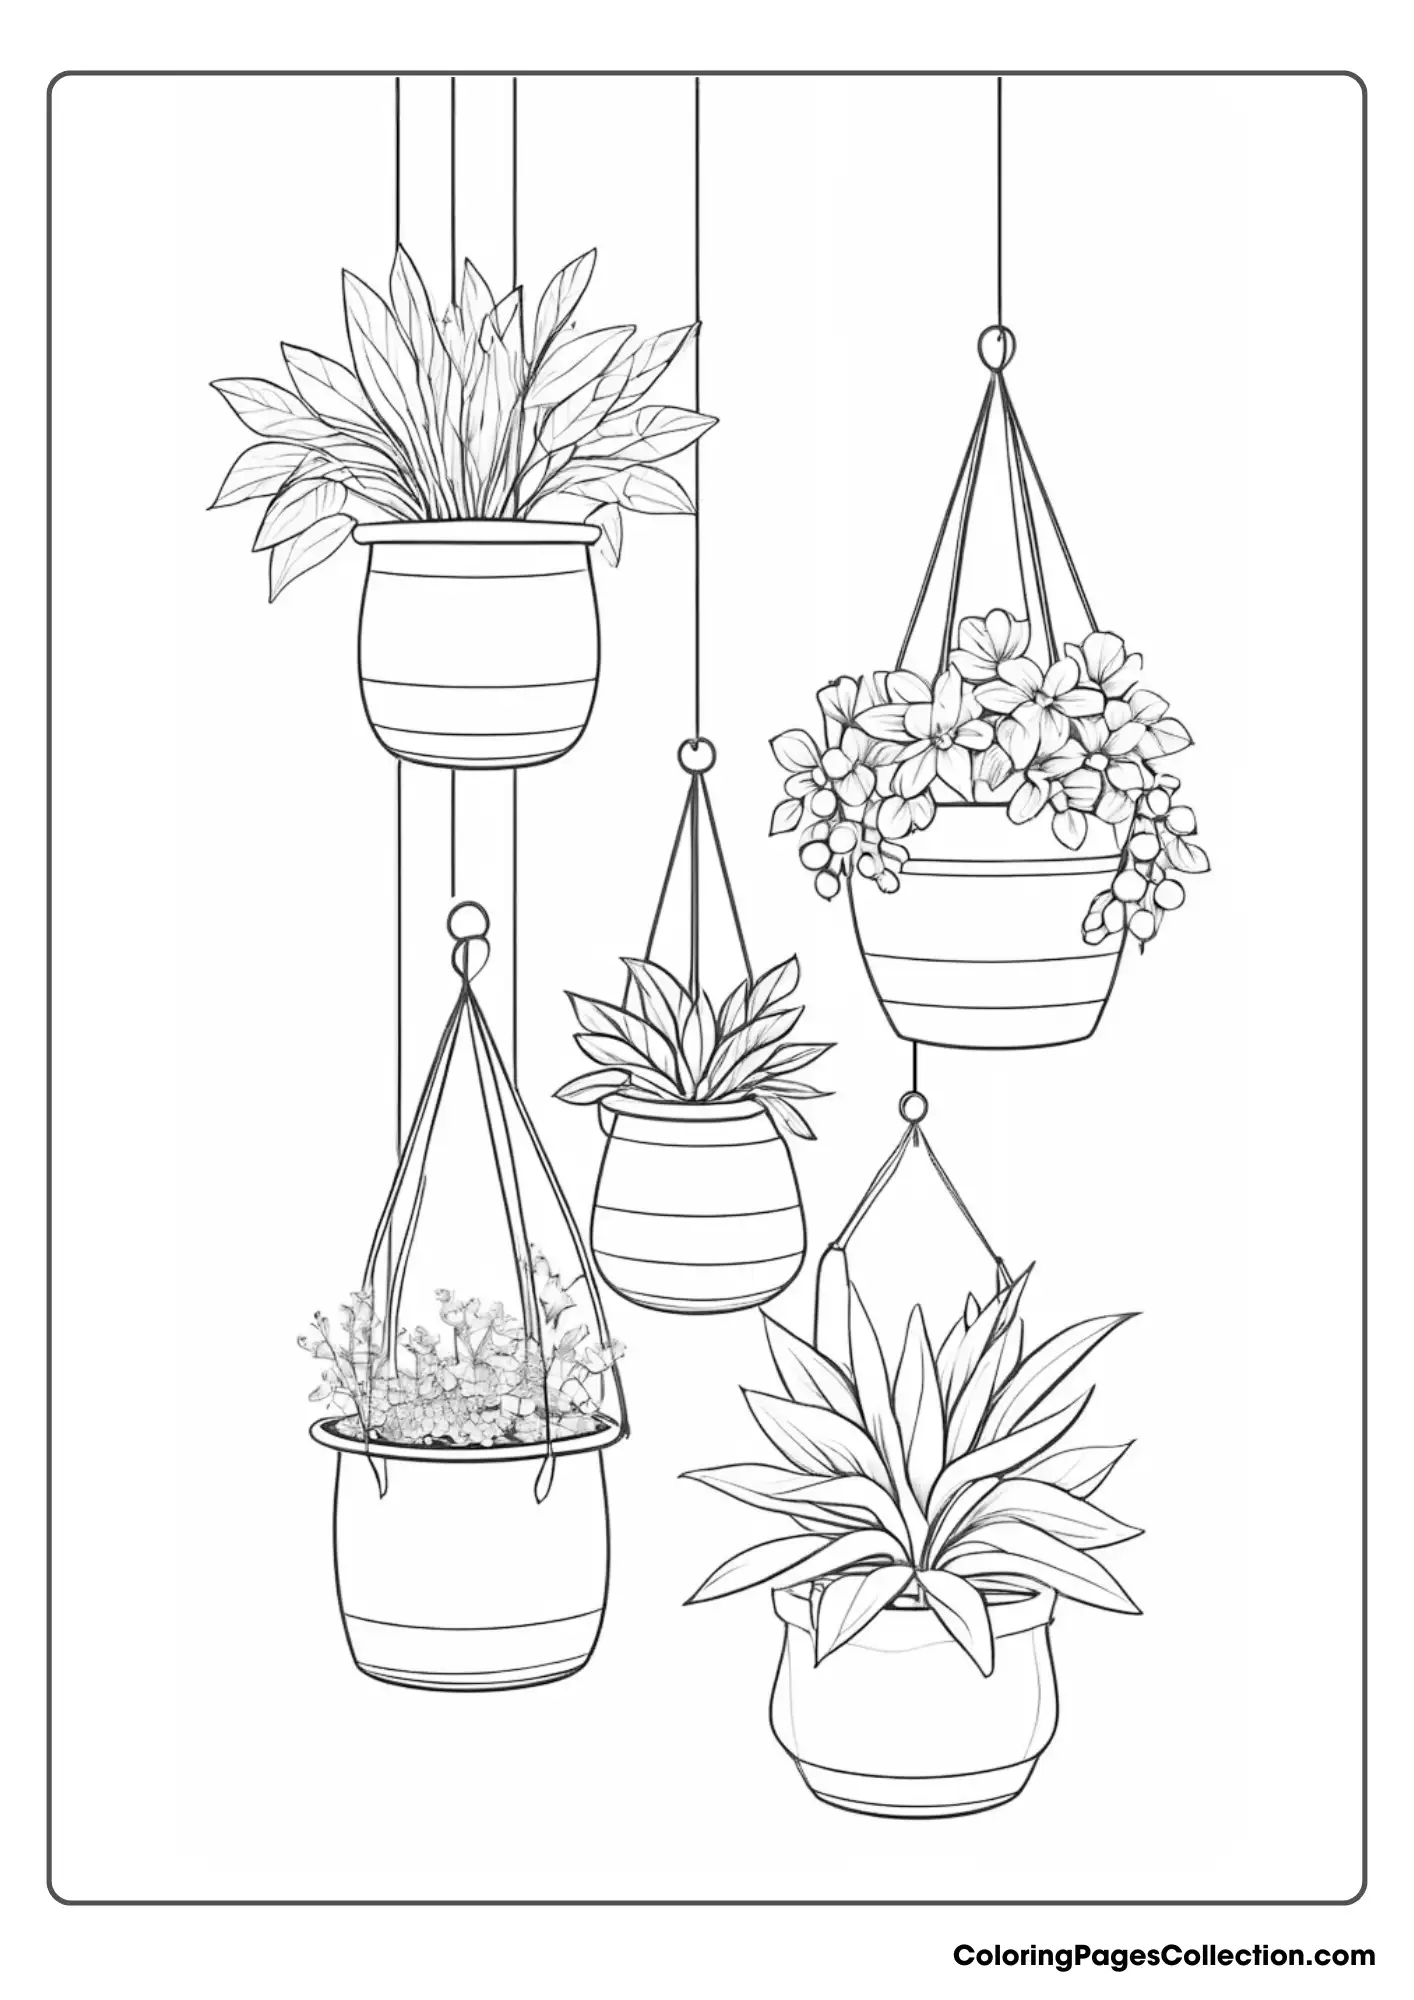 Five Hanging Planters With Plants In Them